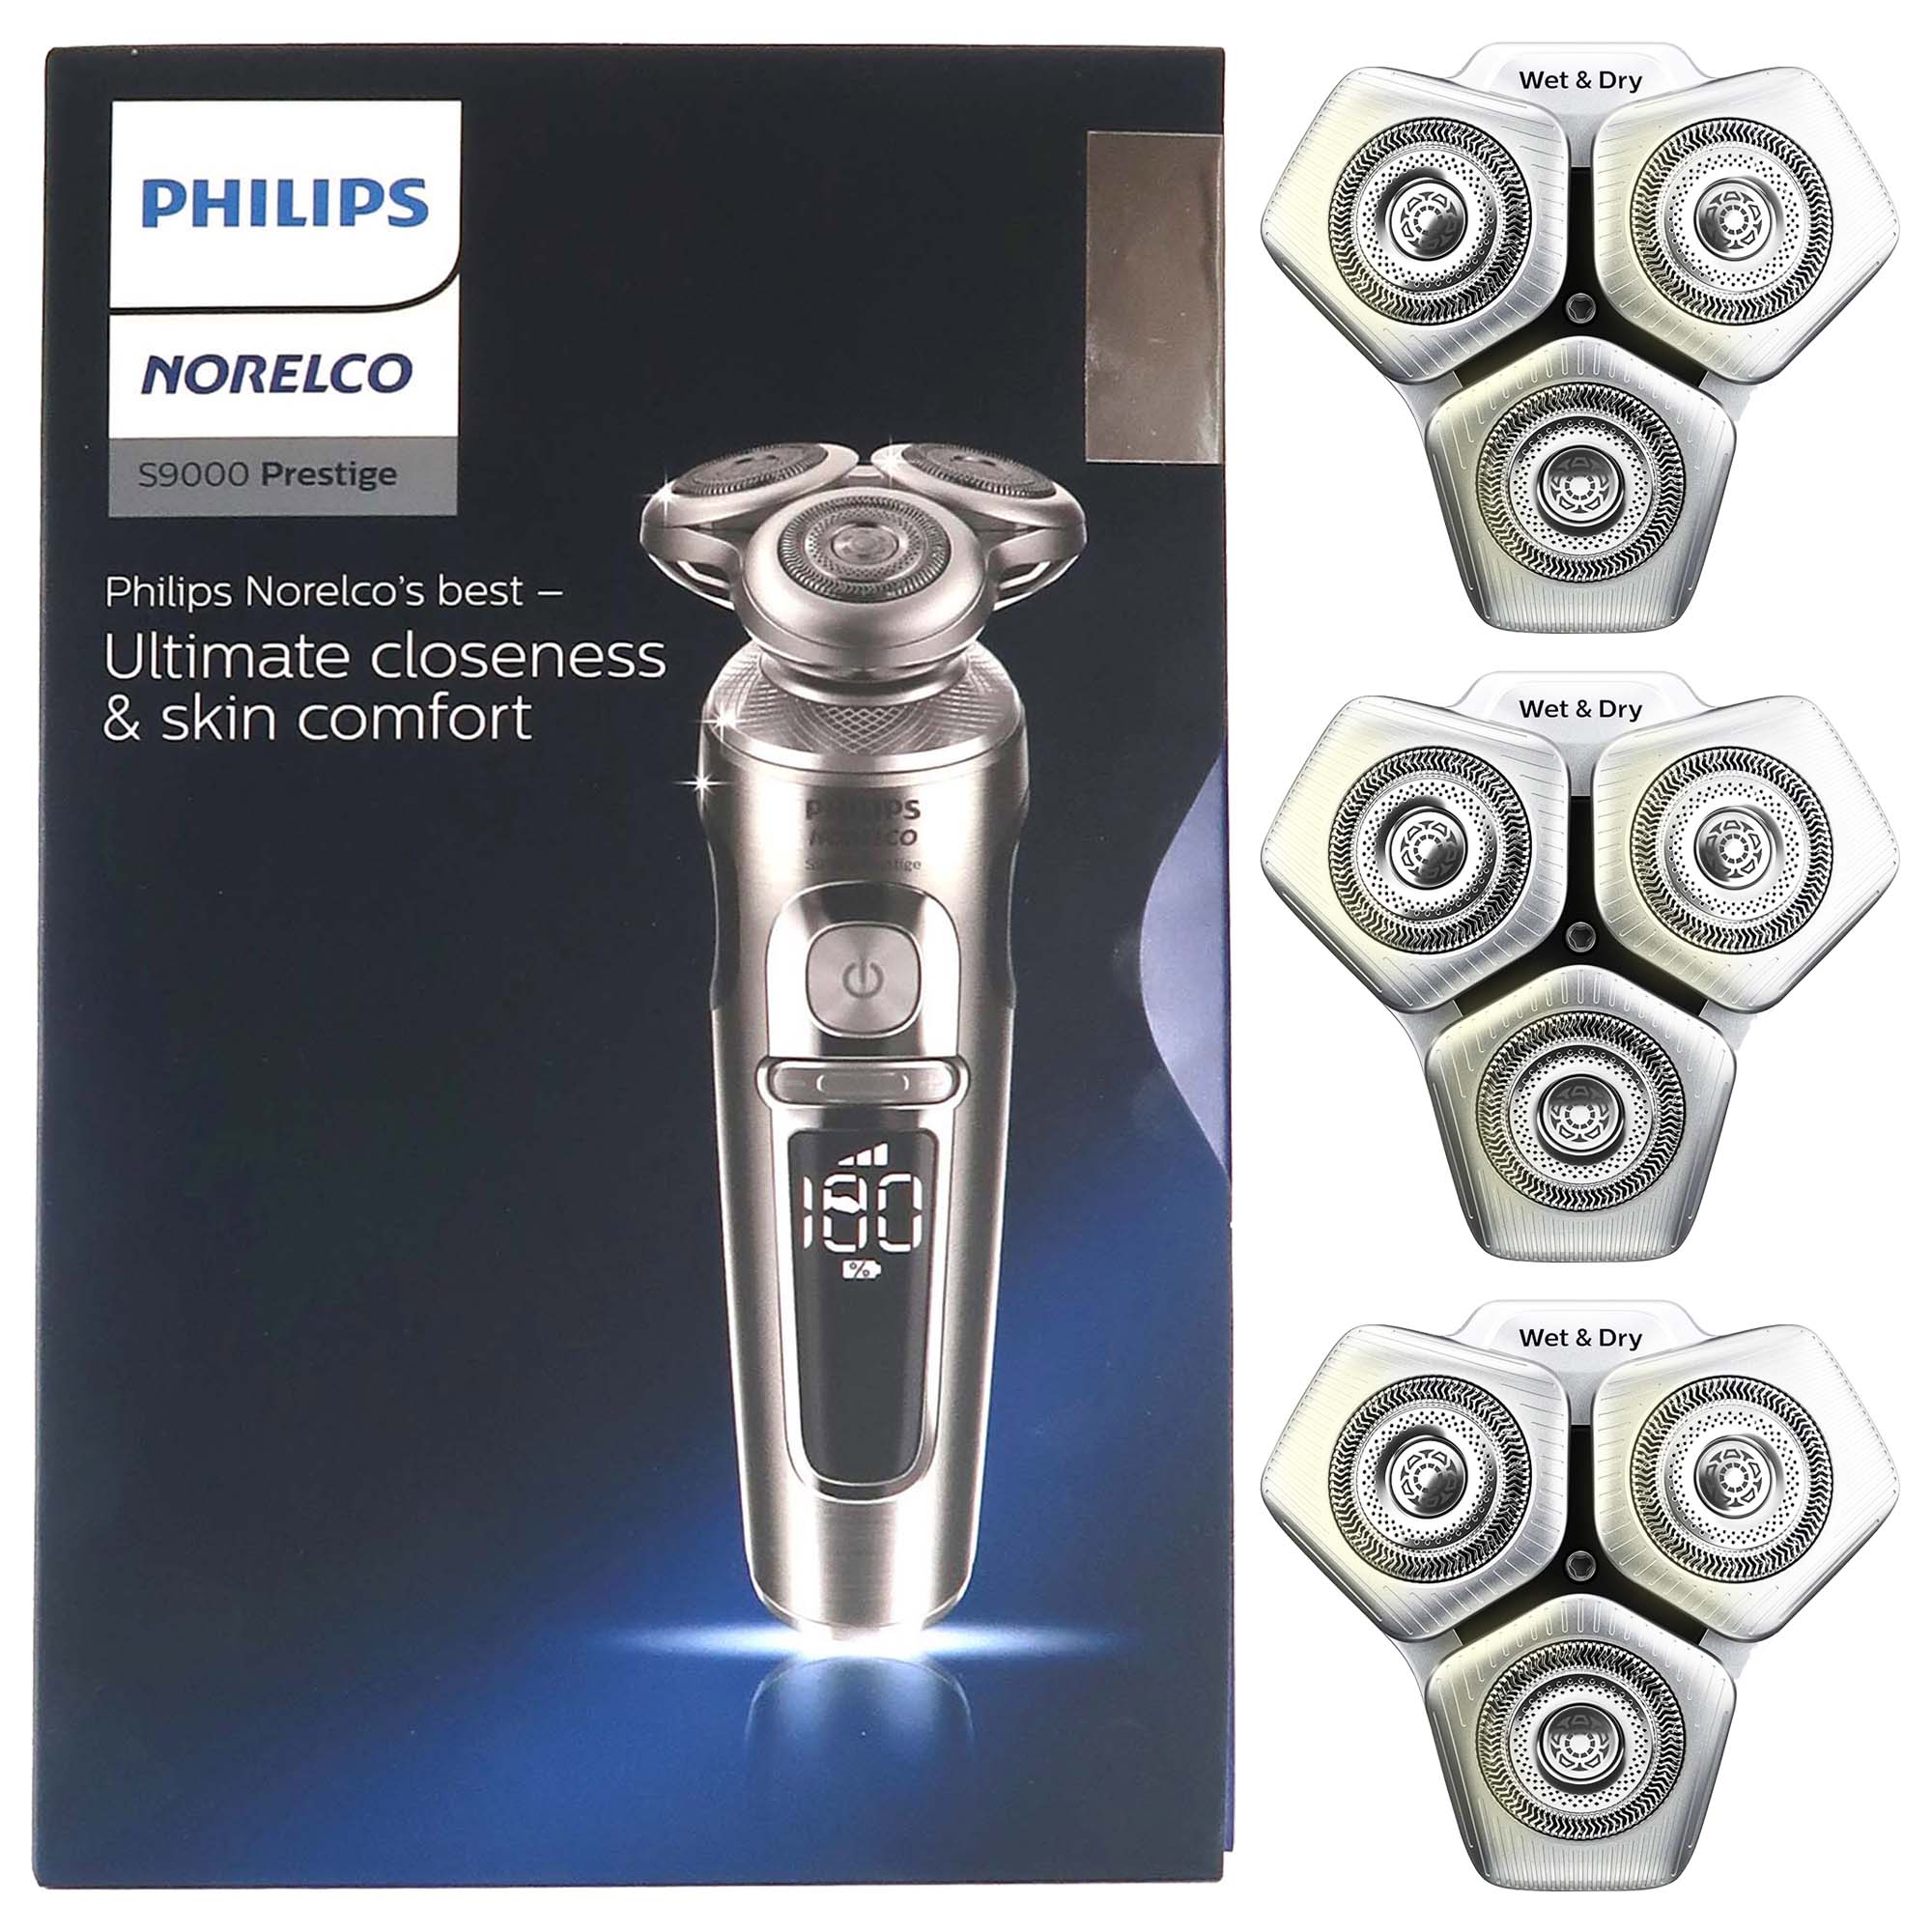 Philips Norelco Shaver 9000 Prestige, Rechargeable Wet or Dry Electric Shaver with Trimmer Attachment and Premium Case, SP9820/8